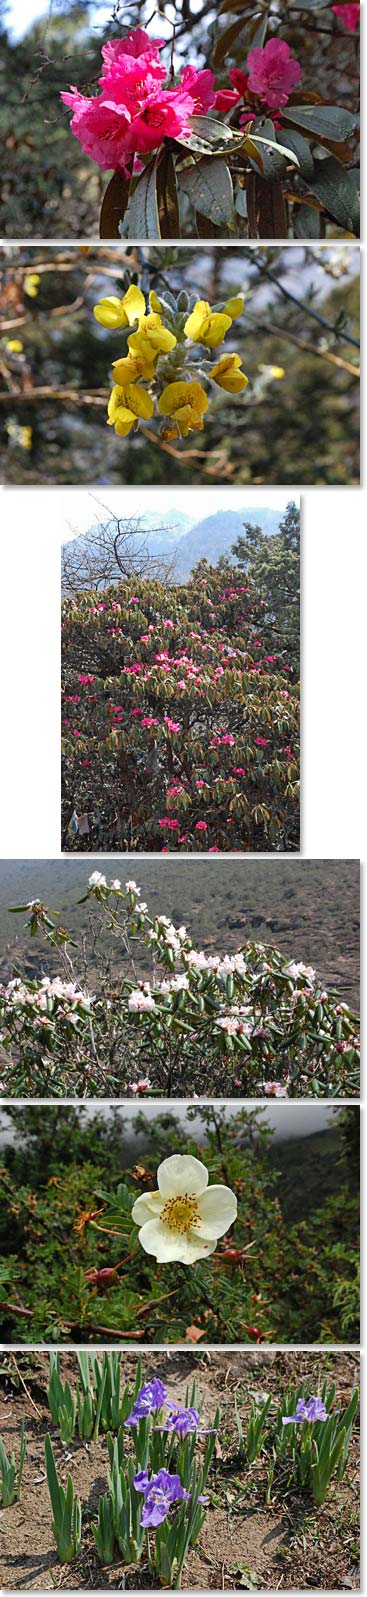 The beautiful rhododendron flowers add beauty and color to our trek to Thame